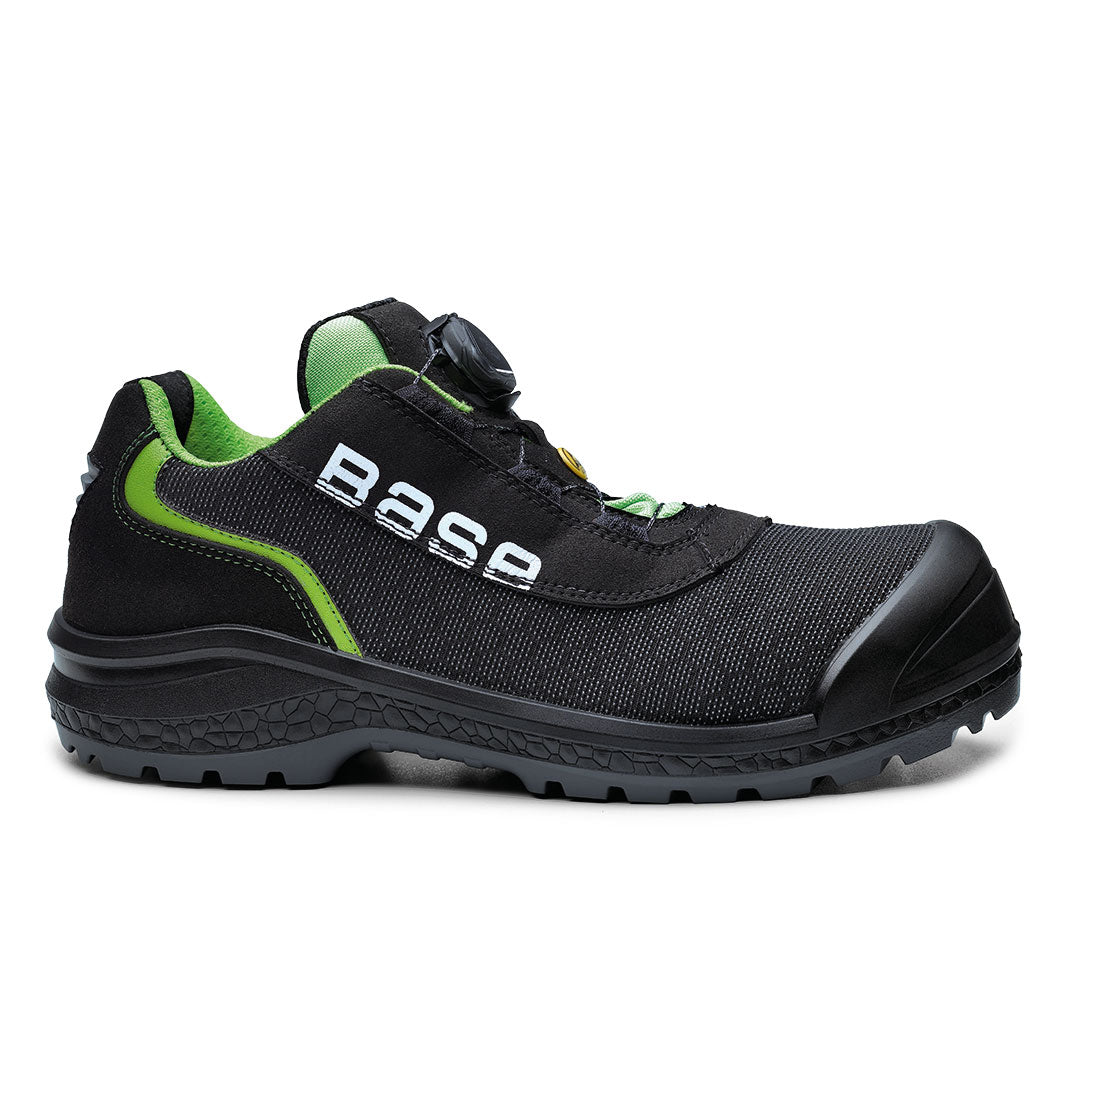 Base Be-Ready Safety Shoes S1P ESD SRC